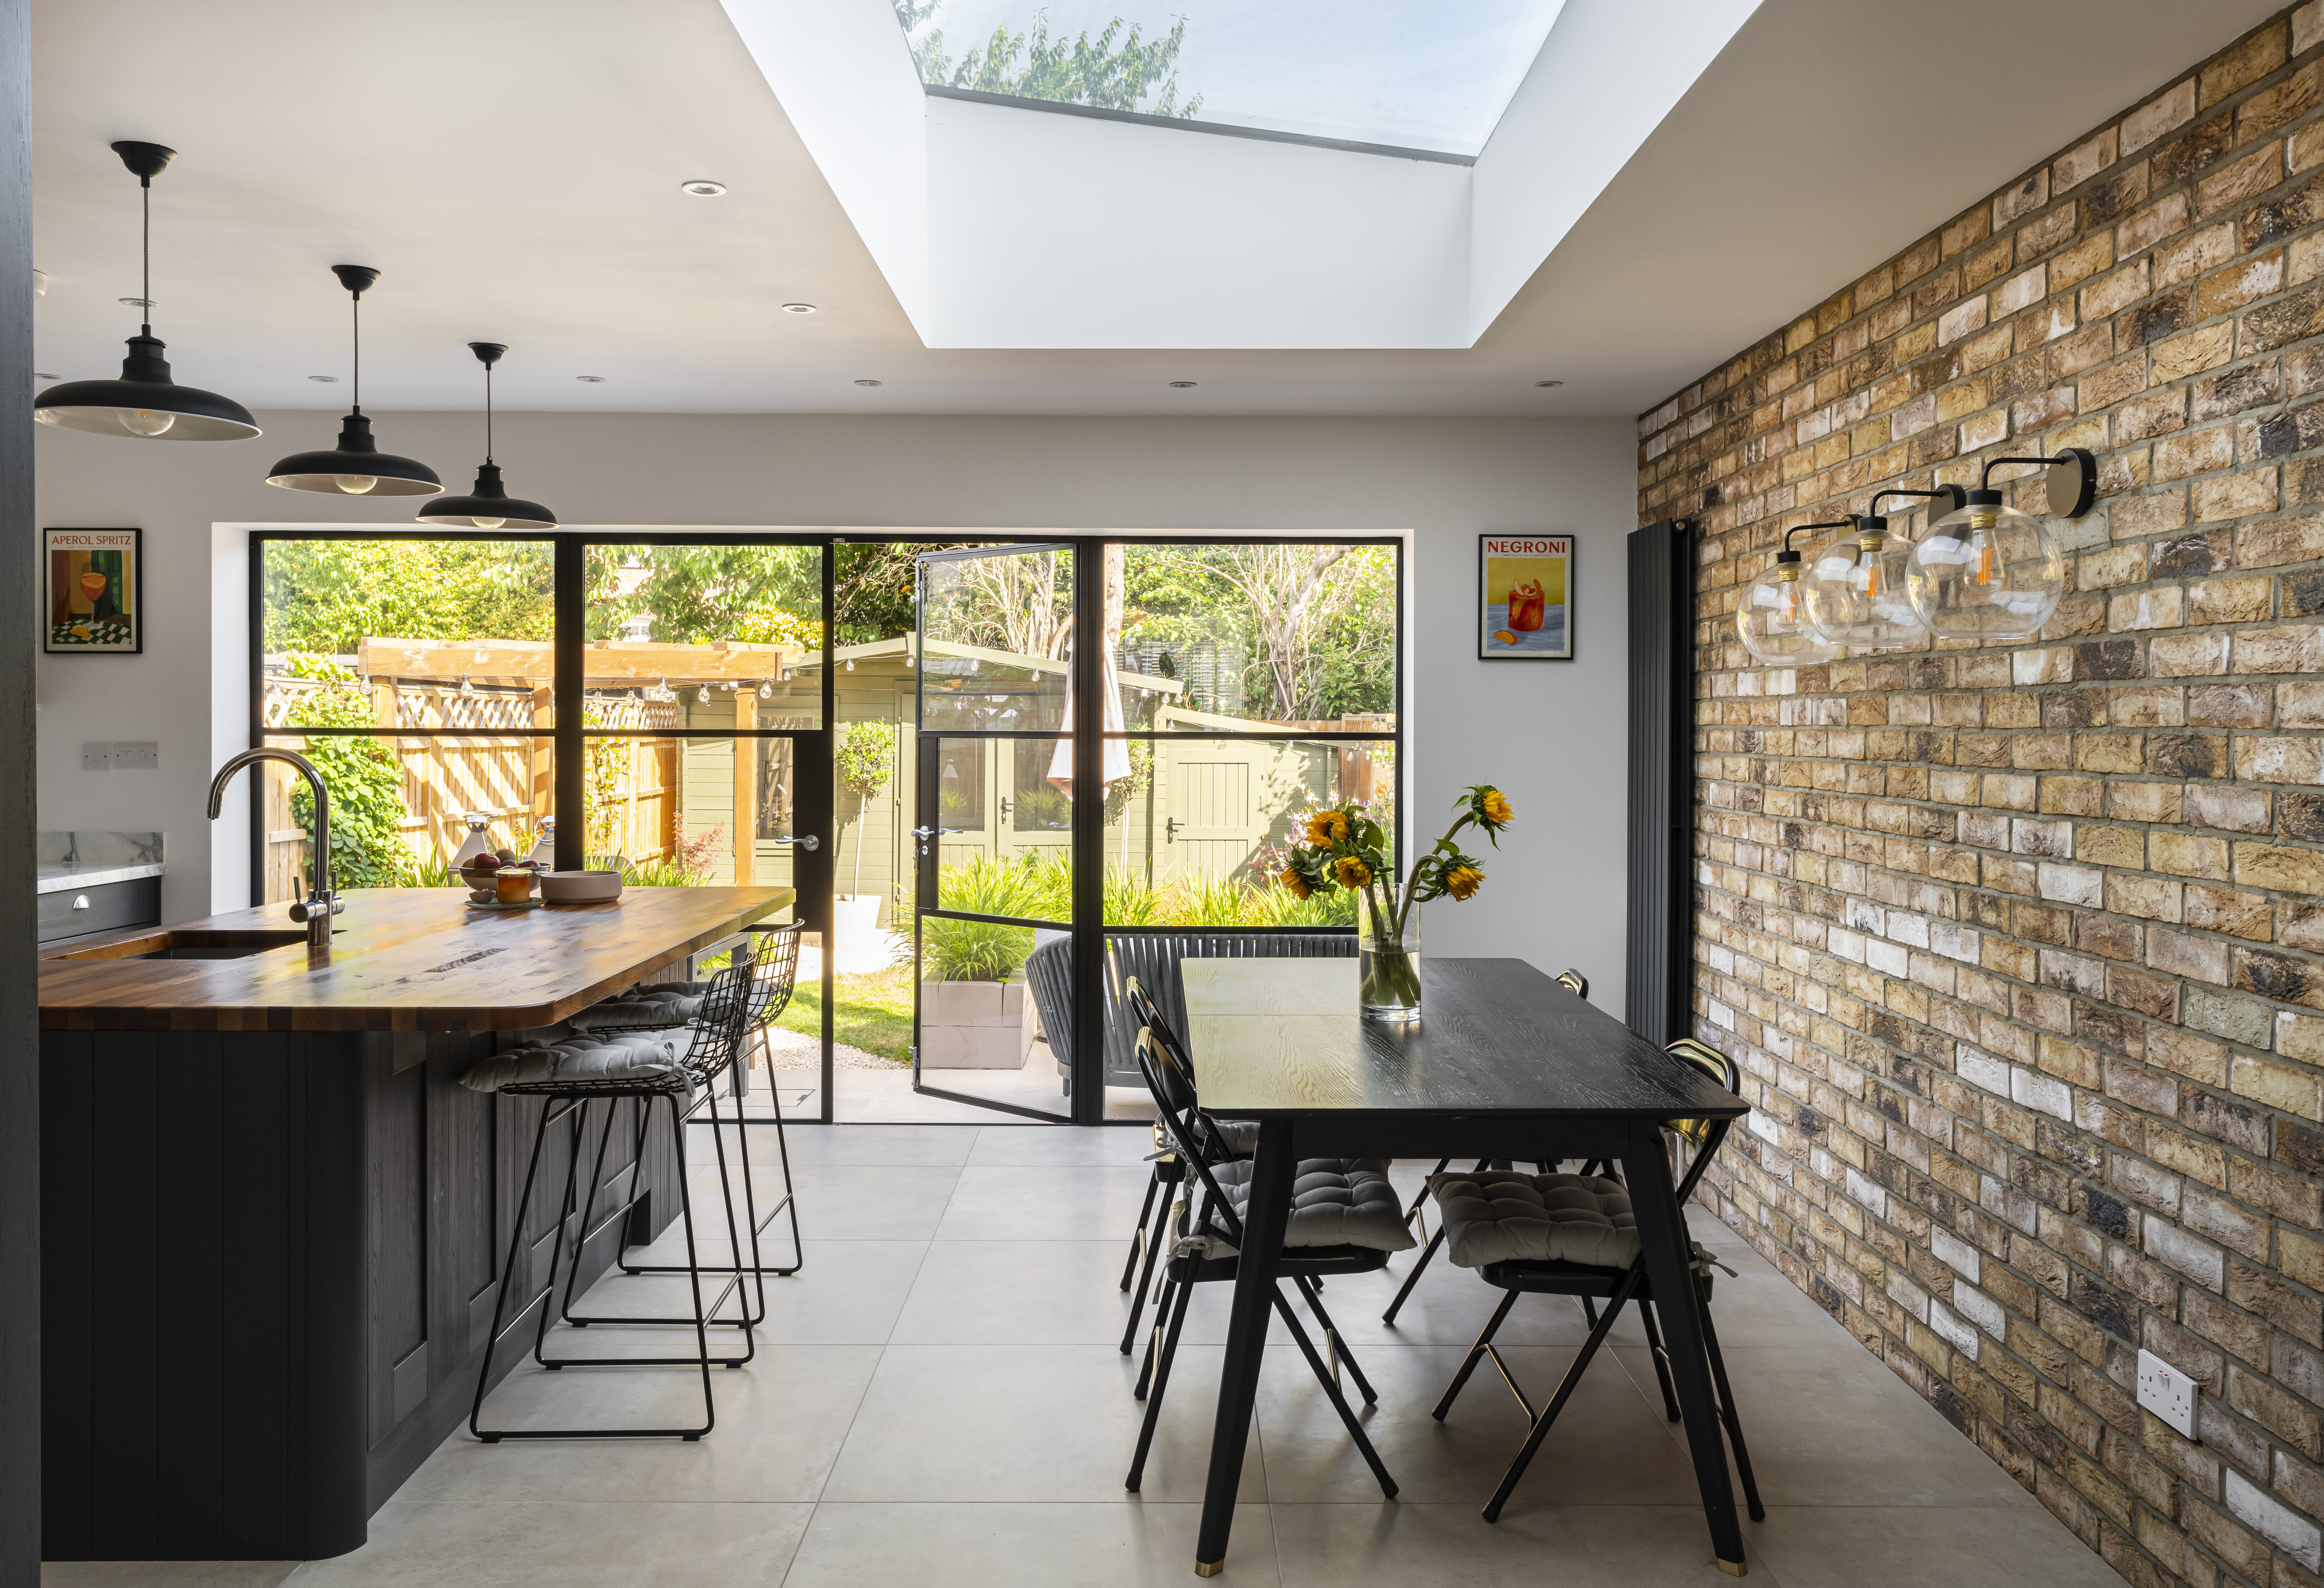 A rustic rear extension renovation with permitted development in Wandsworth